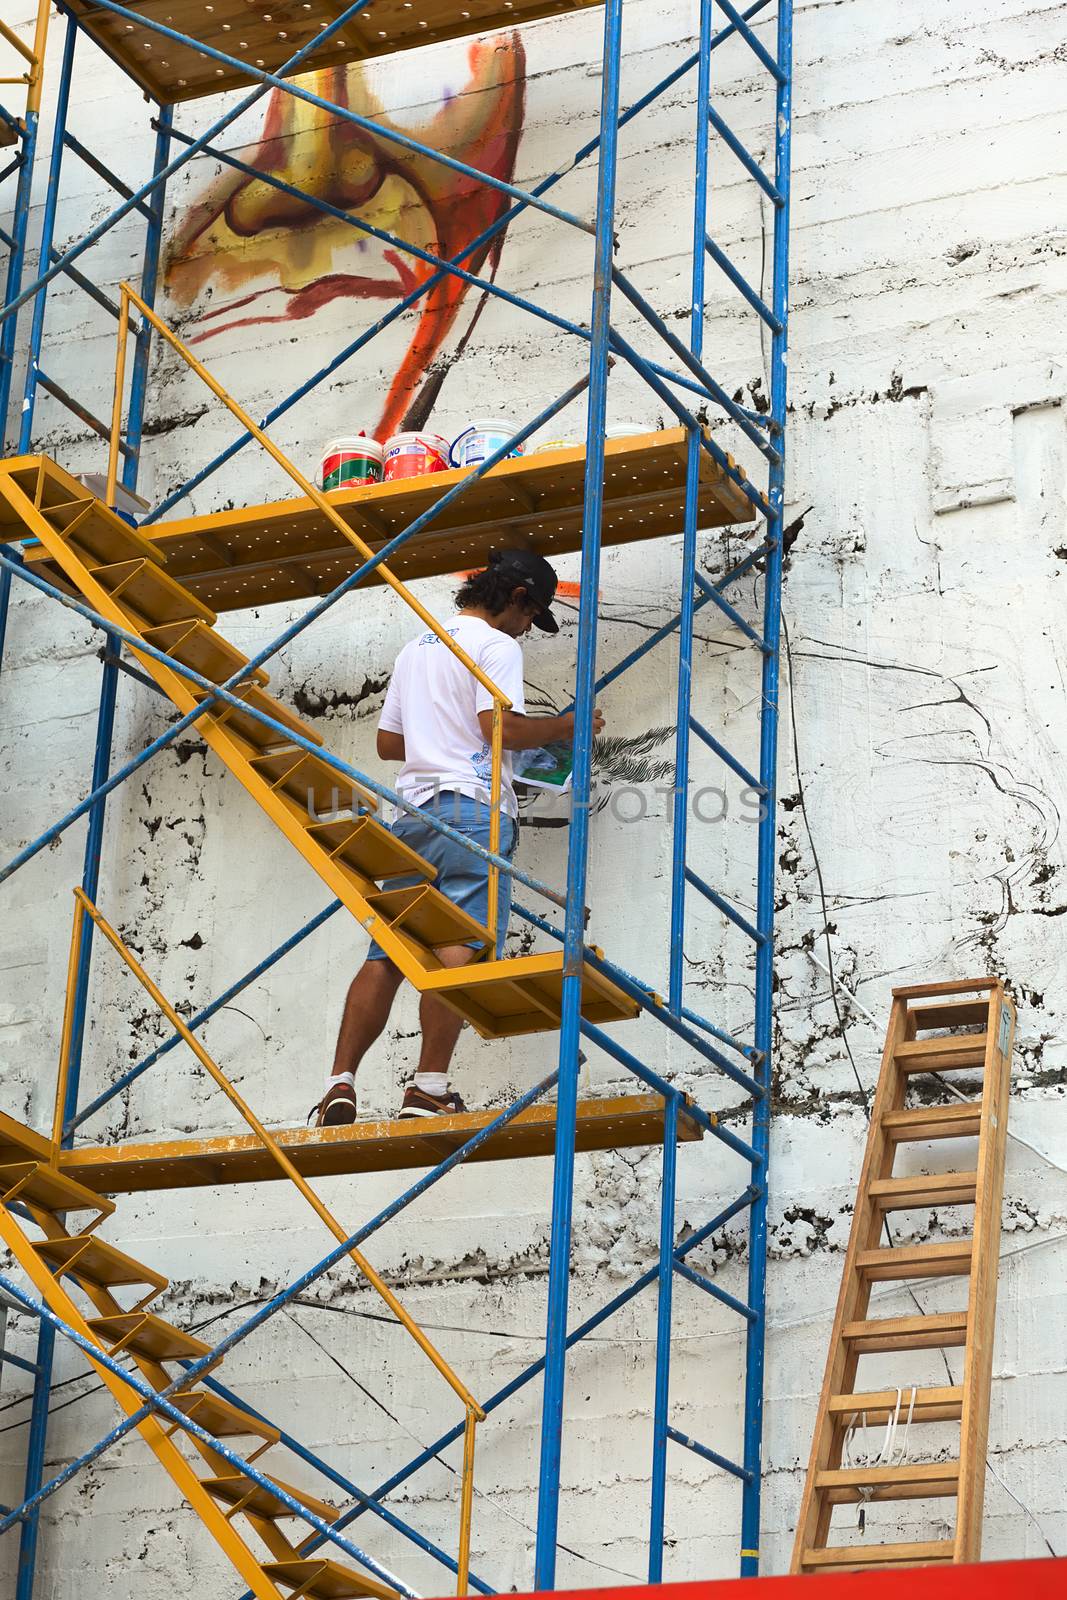 LIMA, PERU - MARCH 3, 2012: Unidentified young man painting a high outside wall of a building standing on a scaffold on March 3, 2012 in Miraflores, Lima, Peru